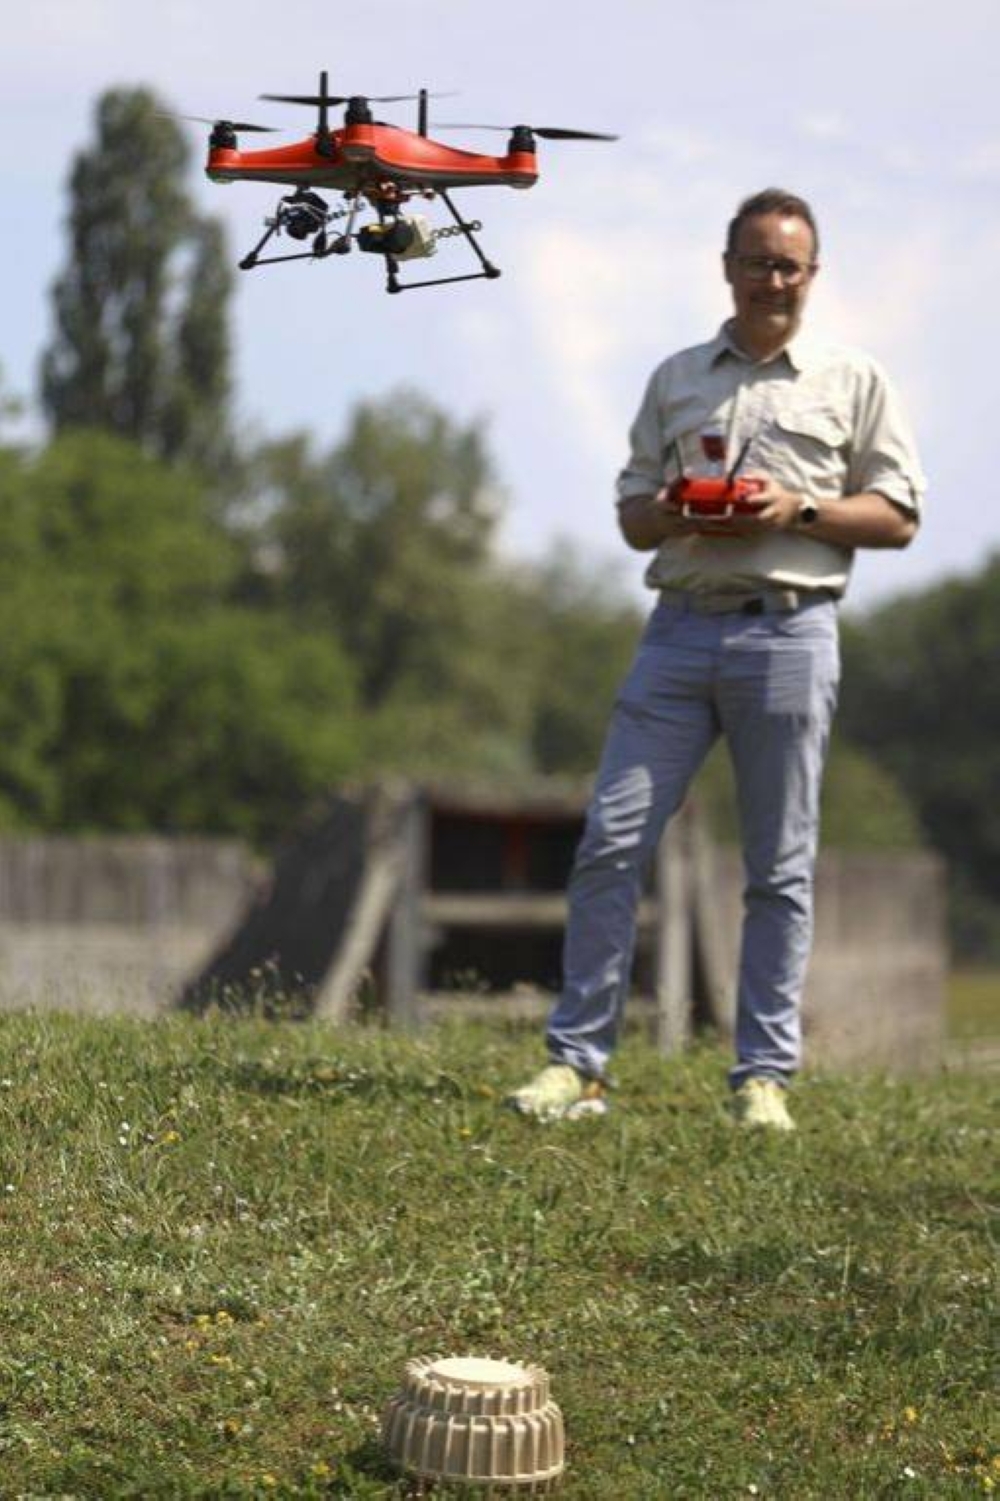 A drone used by the International Committee of the Red Cross is shown in a demonstration flight in a Geneva suburb on June 7.